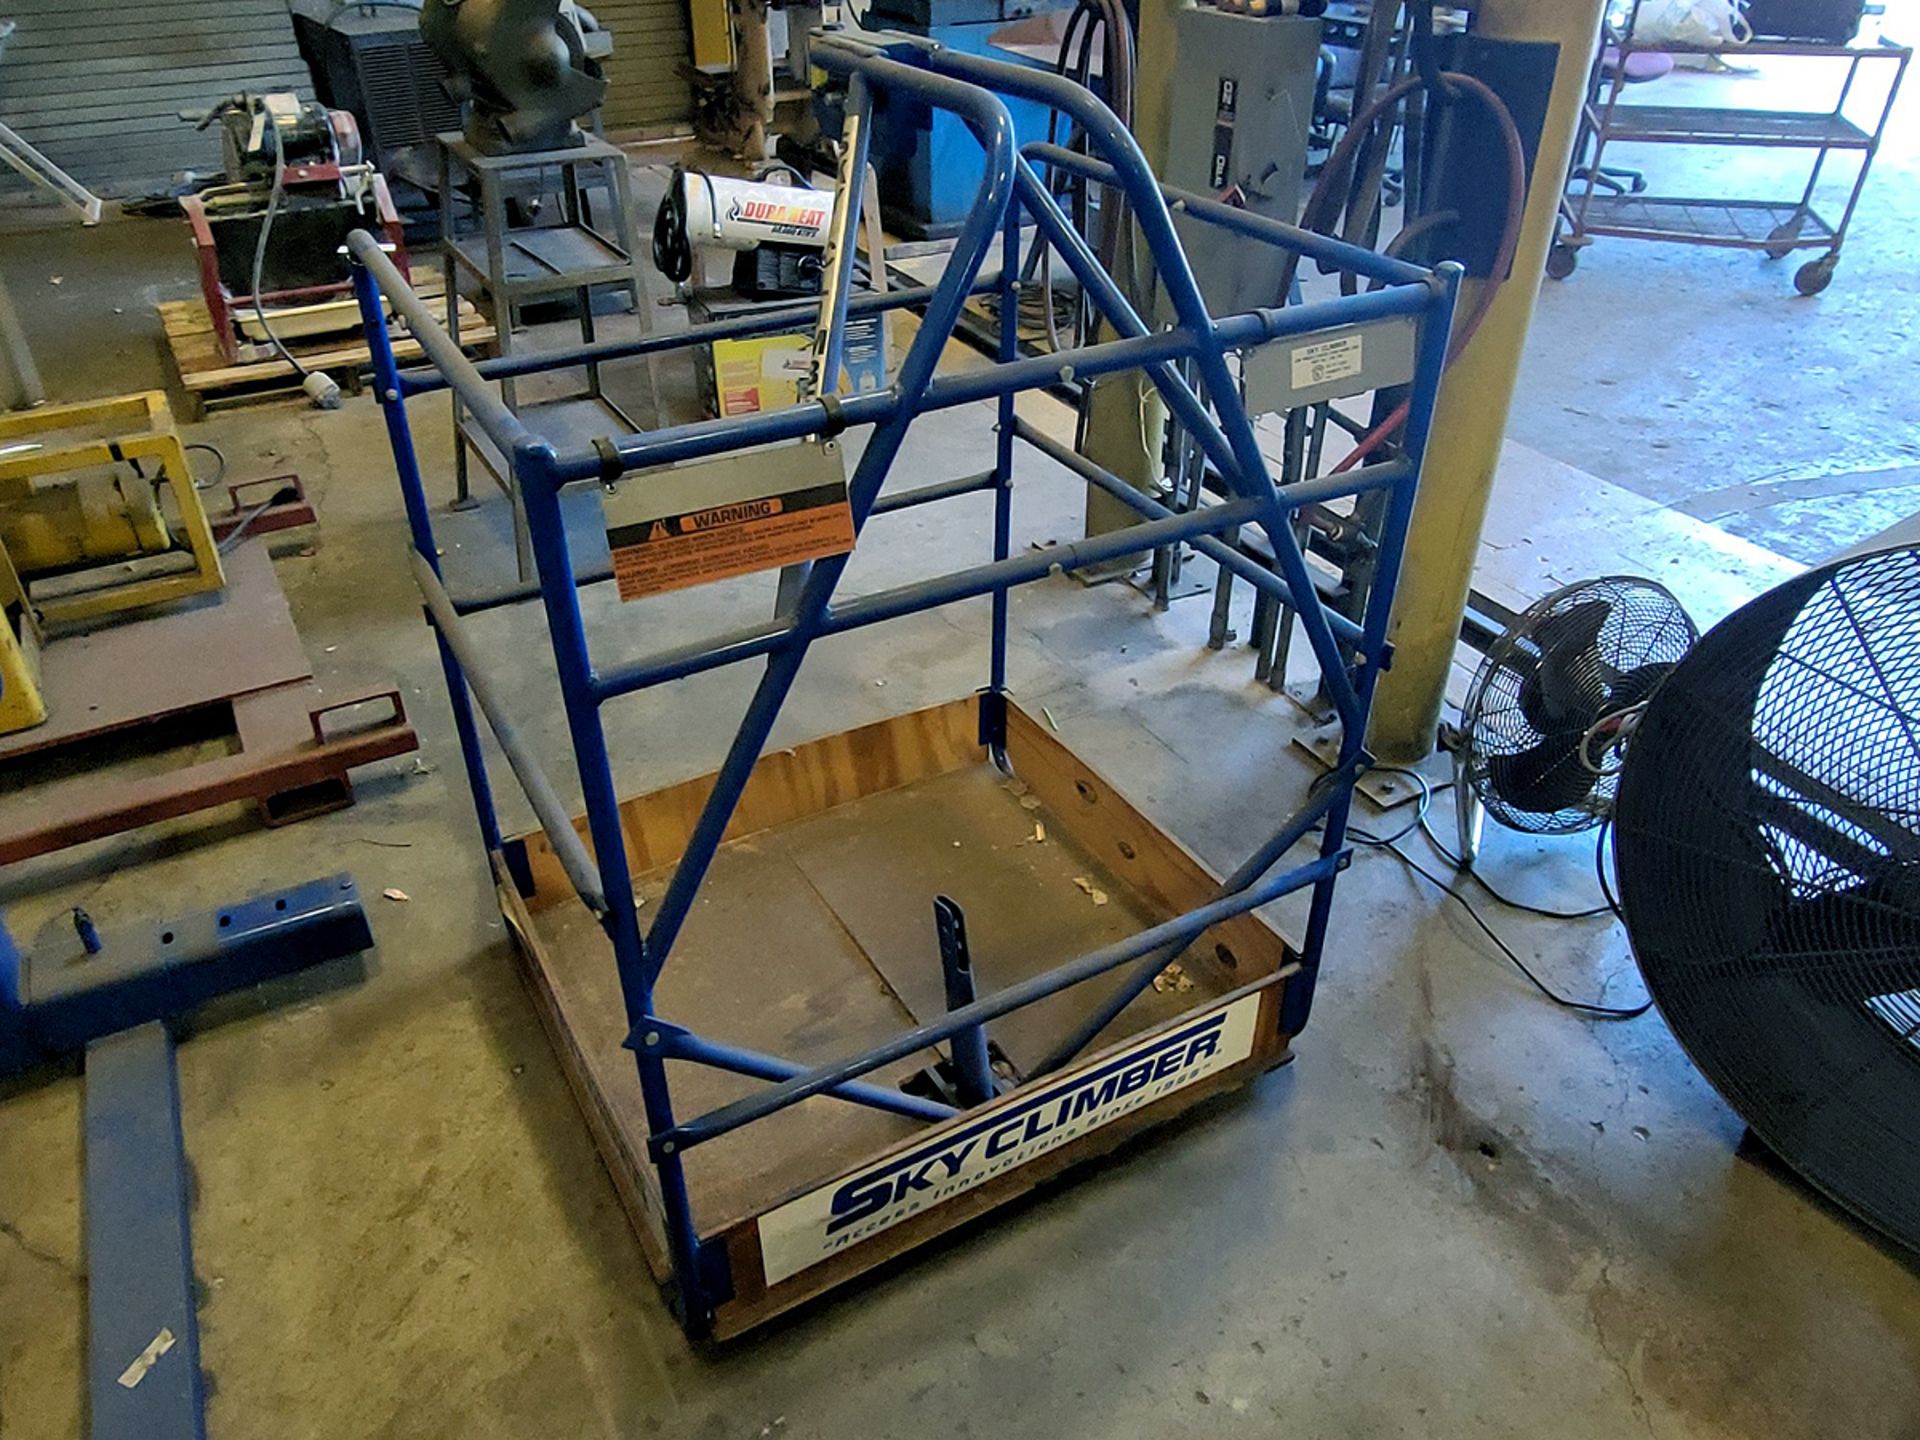 Sky Climber 1,000 Lbs. Capacity Knock Down Work Cage - Image 2 of 3